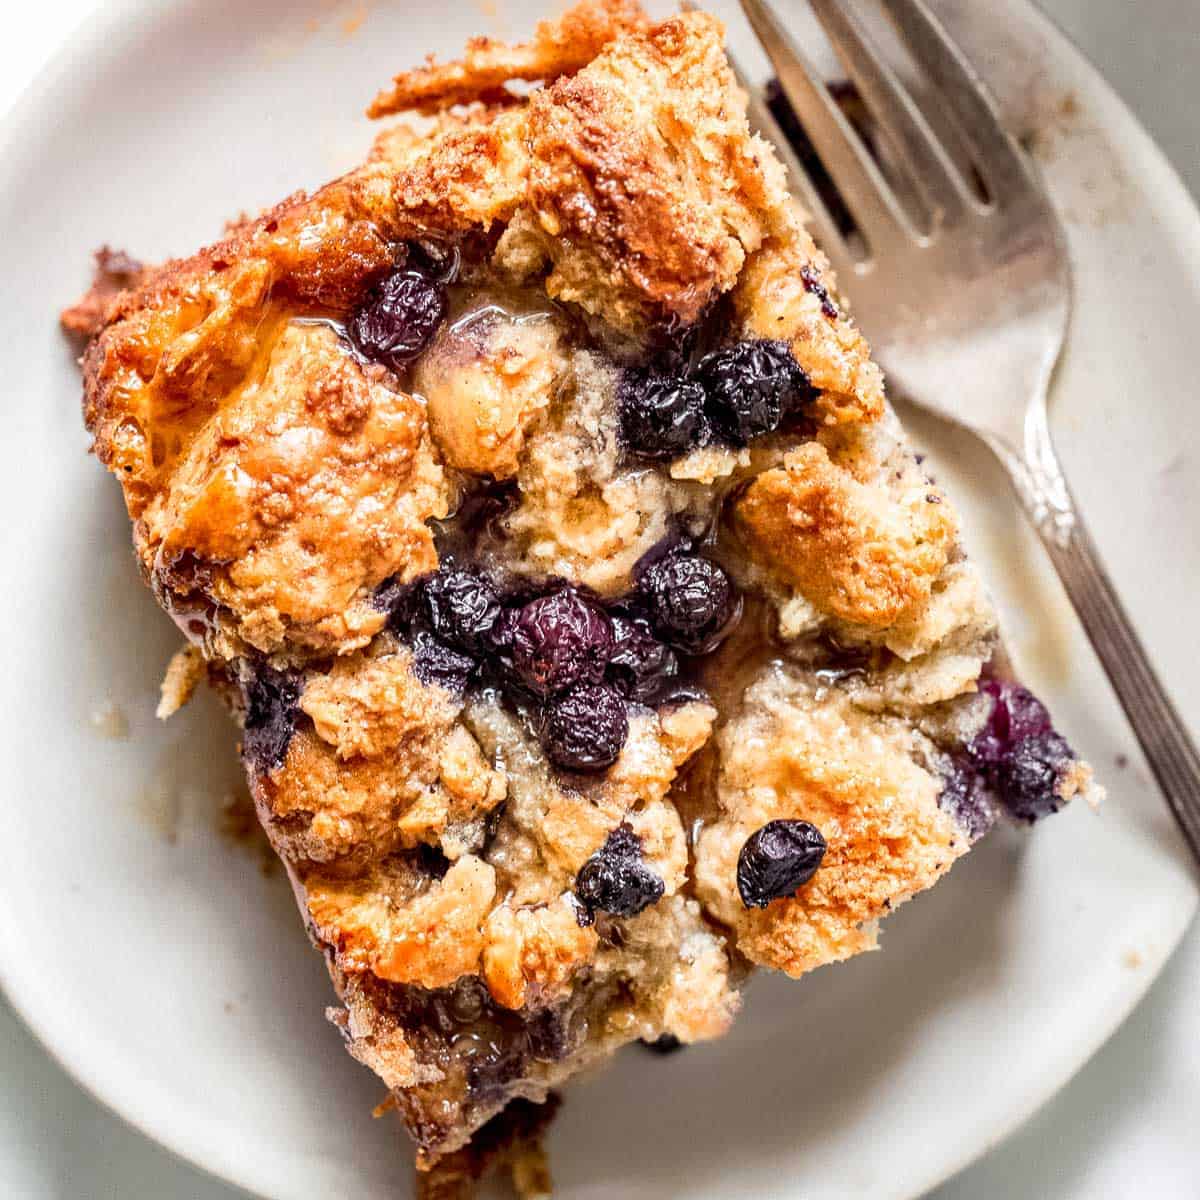 Blueberry bread pudding on a plate.